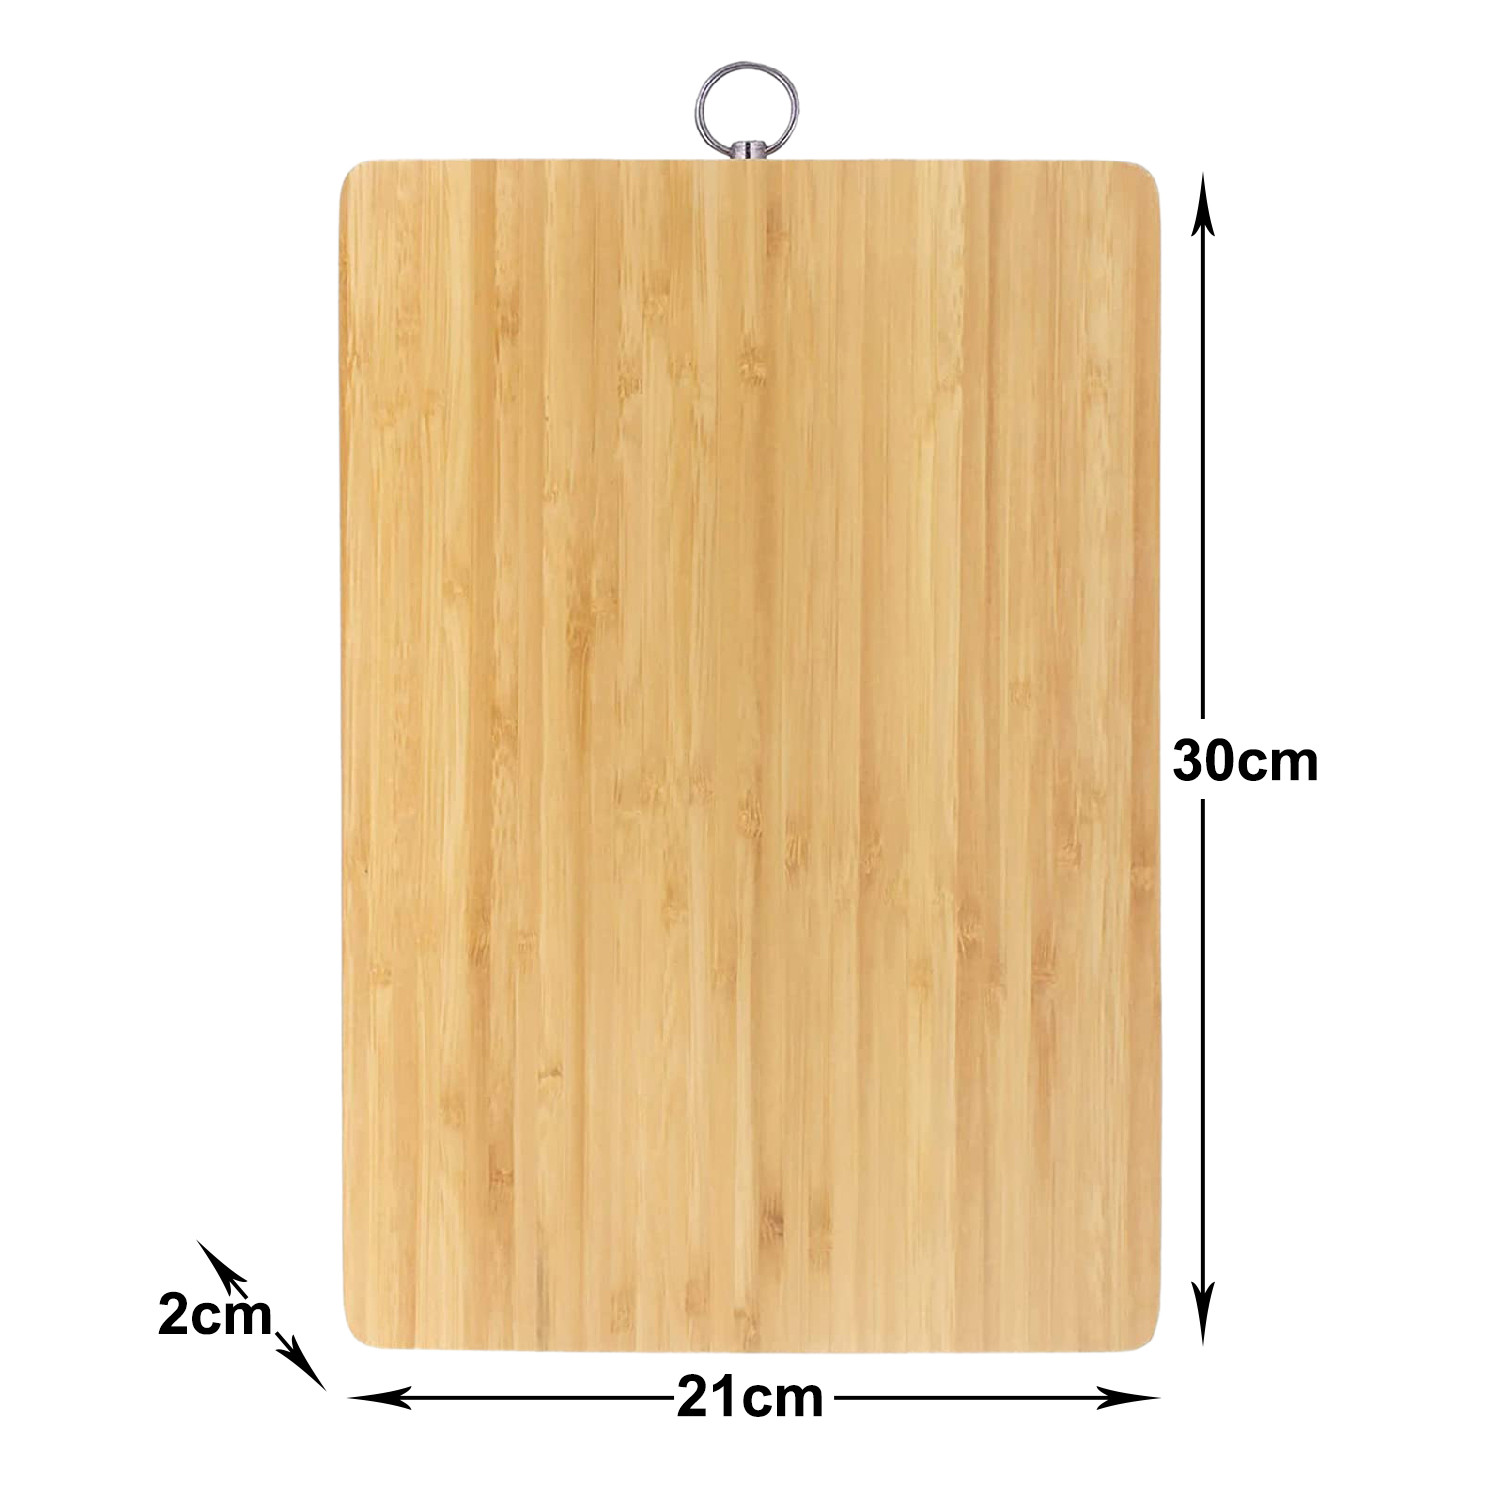 Kuber Industries Cutting Board|Wooden Slicing & Kitchen Chopping Board with Steel Hook for Hanging Fruits,Vegetables (Brown)